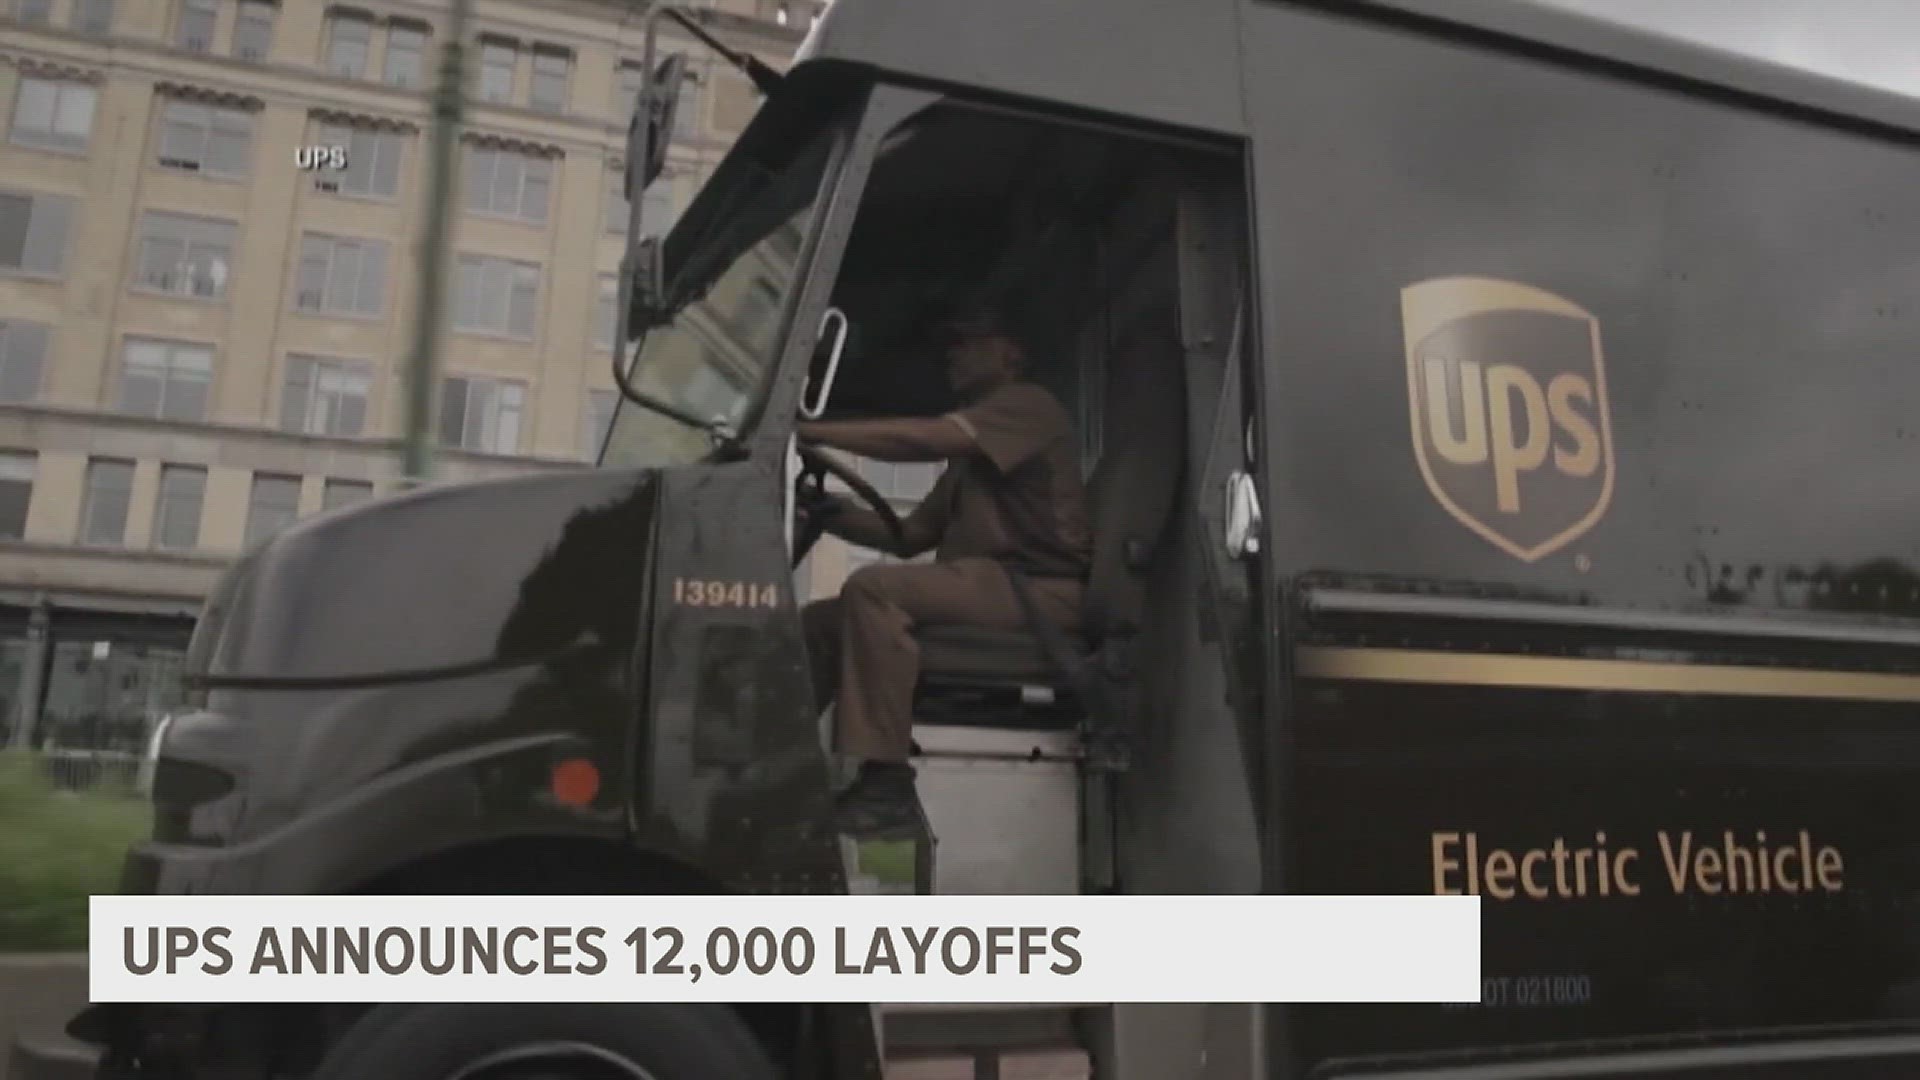 The CEO of UPS said that by reducing the company's headcount, UPS will realize $1 billion in cost savings.